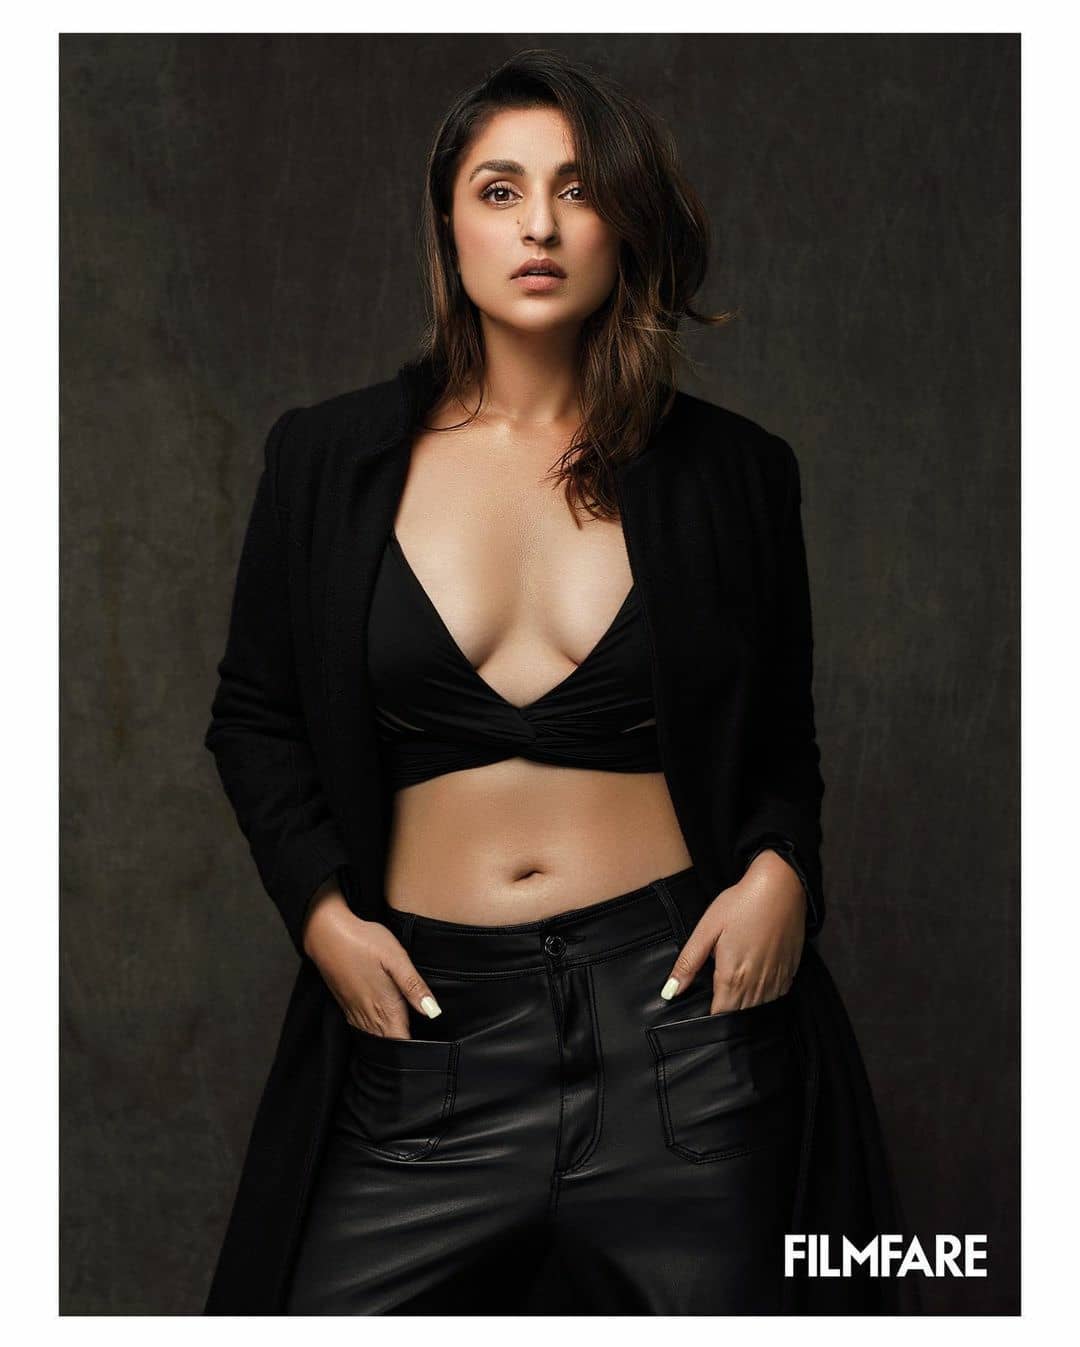 Parineeti Chopra shares her stunning picture in black outfit 9418